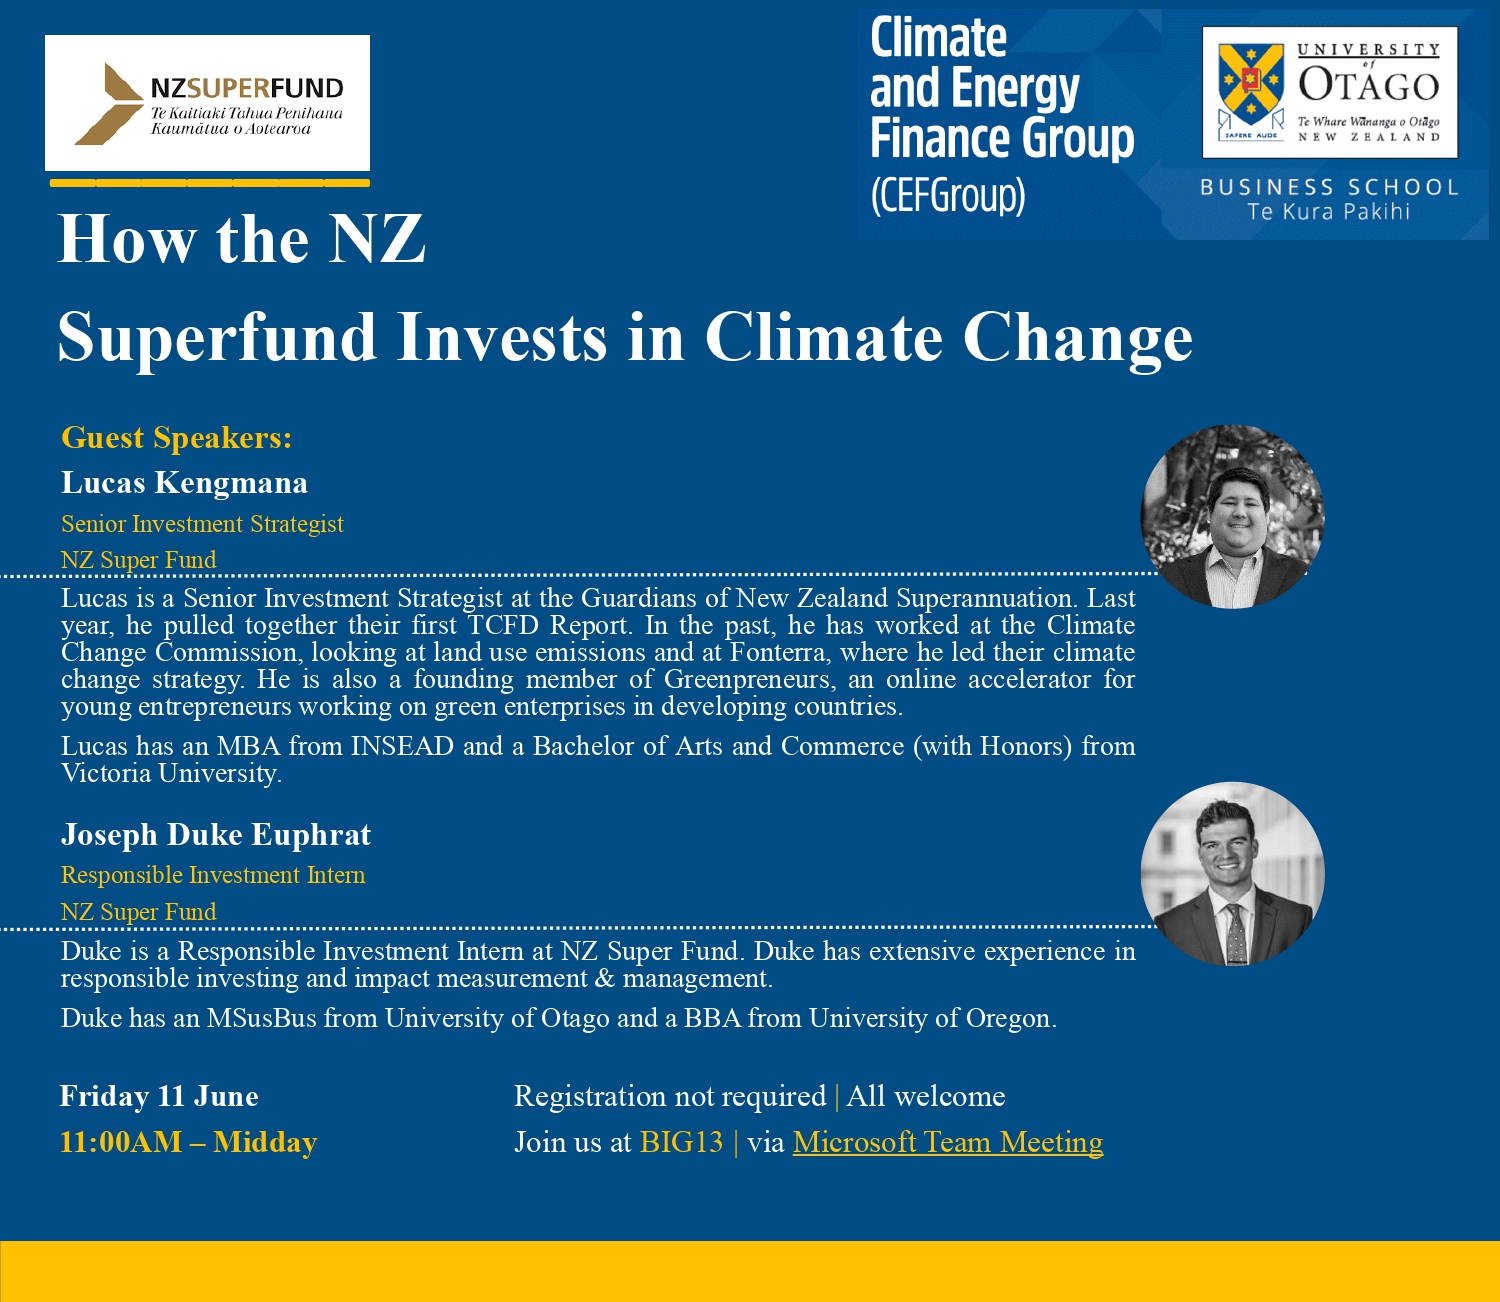 CEFGroup Webinar | How the NZ Superfund Invests in Climate Change @ Biochemistry Building Seminar Room G.13